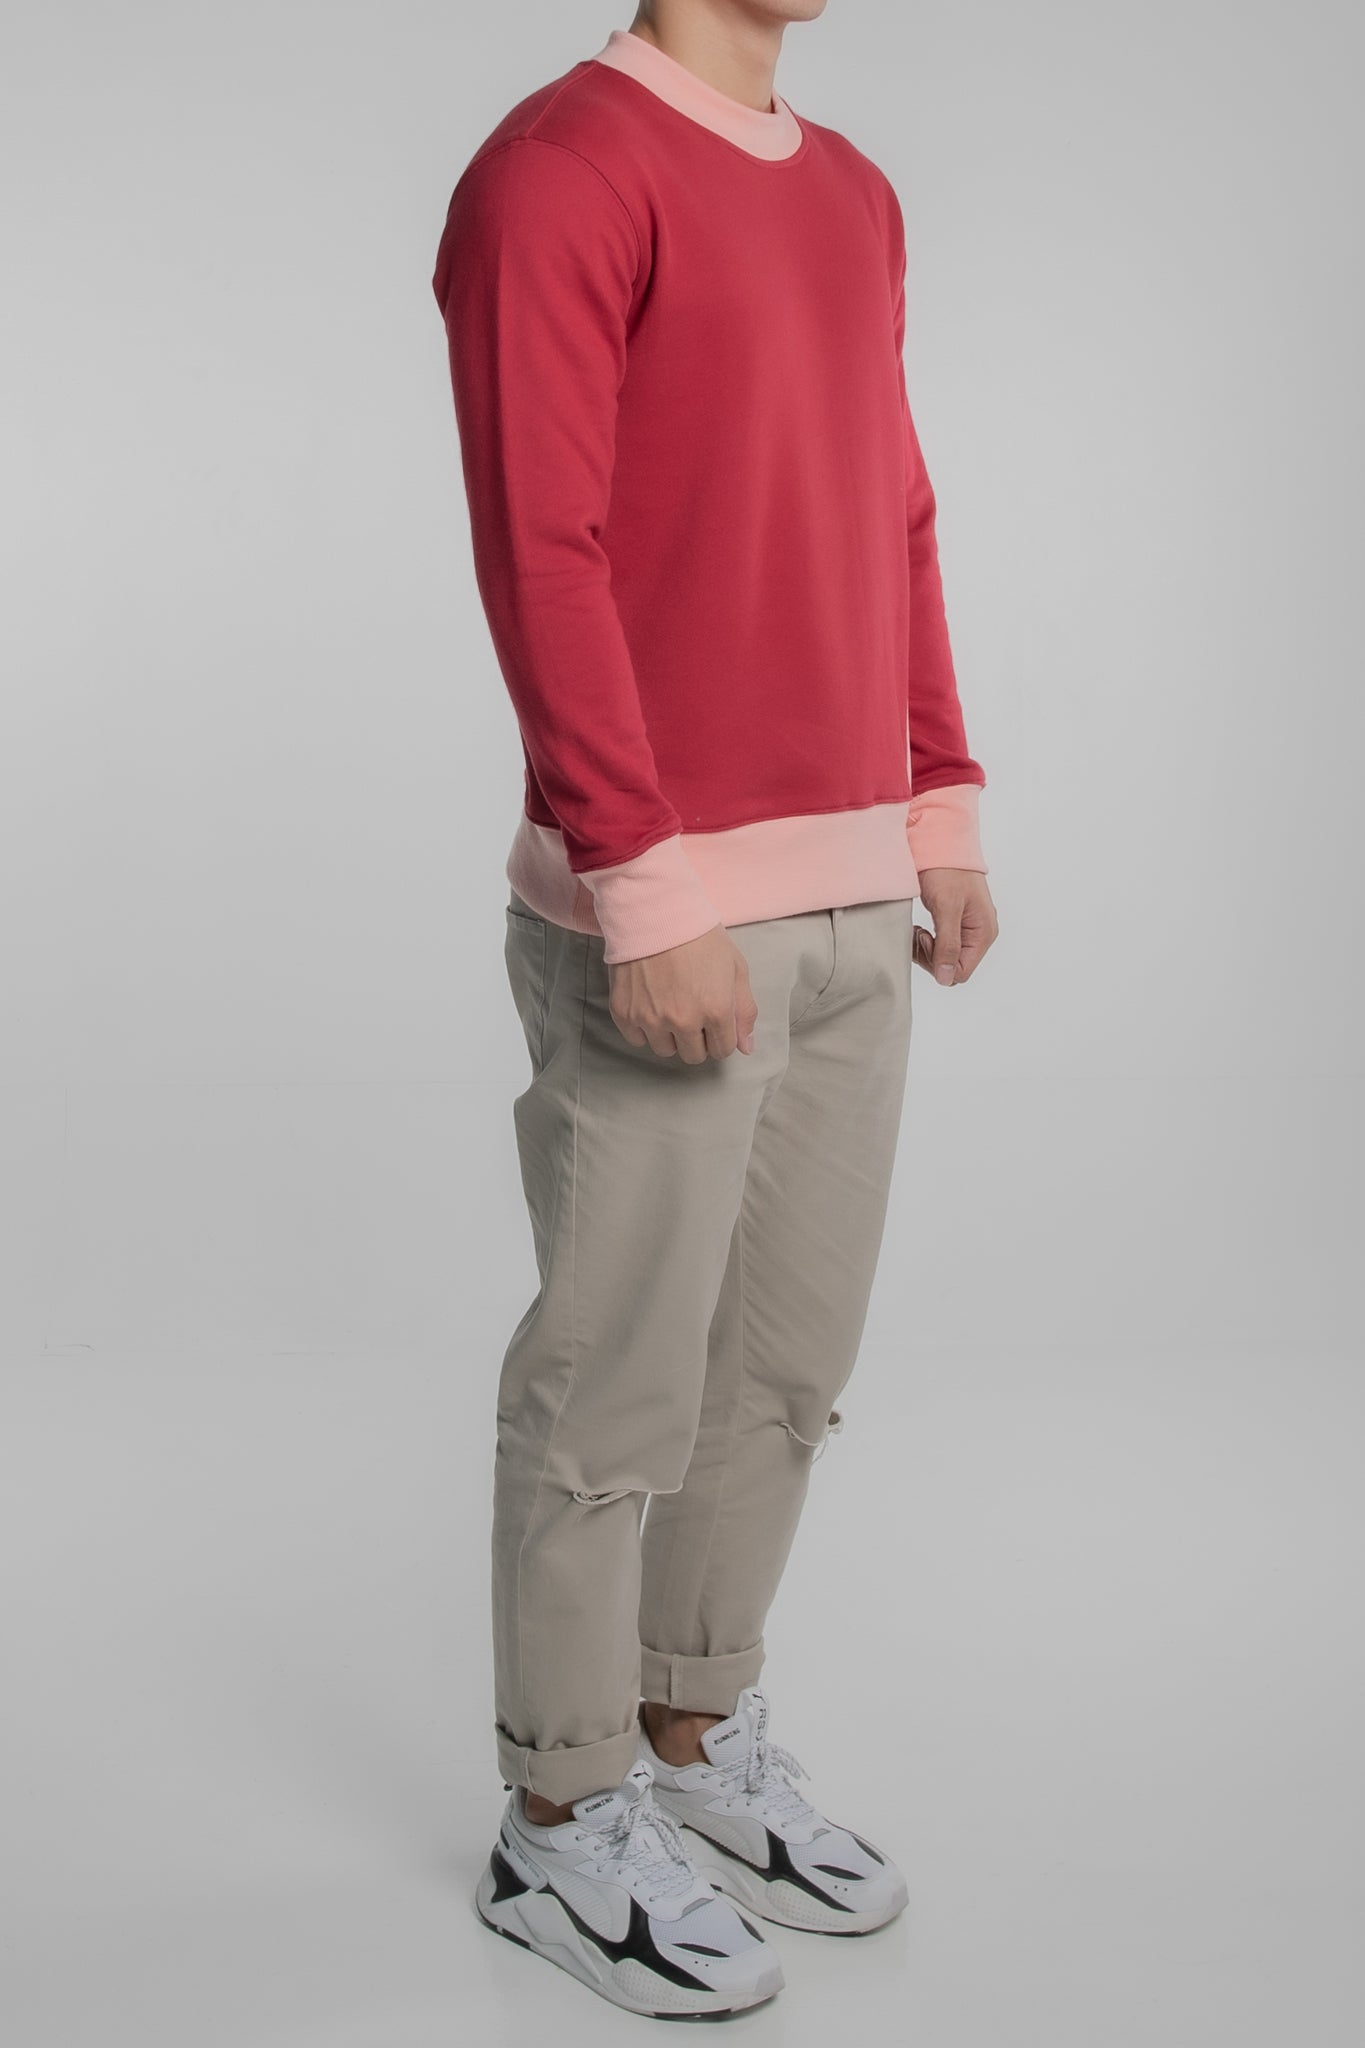 Contrast Collar Pullover (Red)